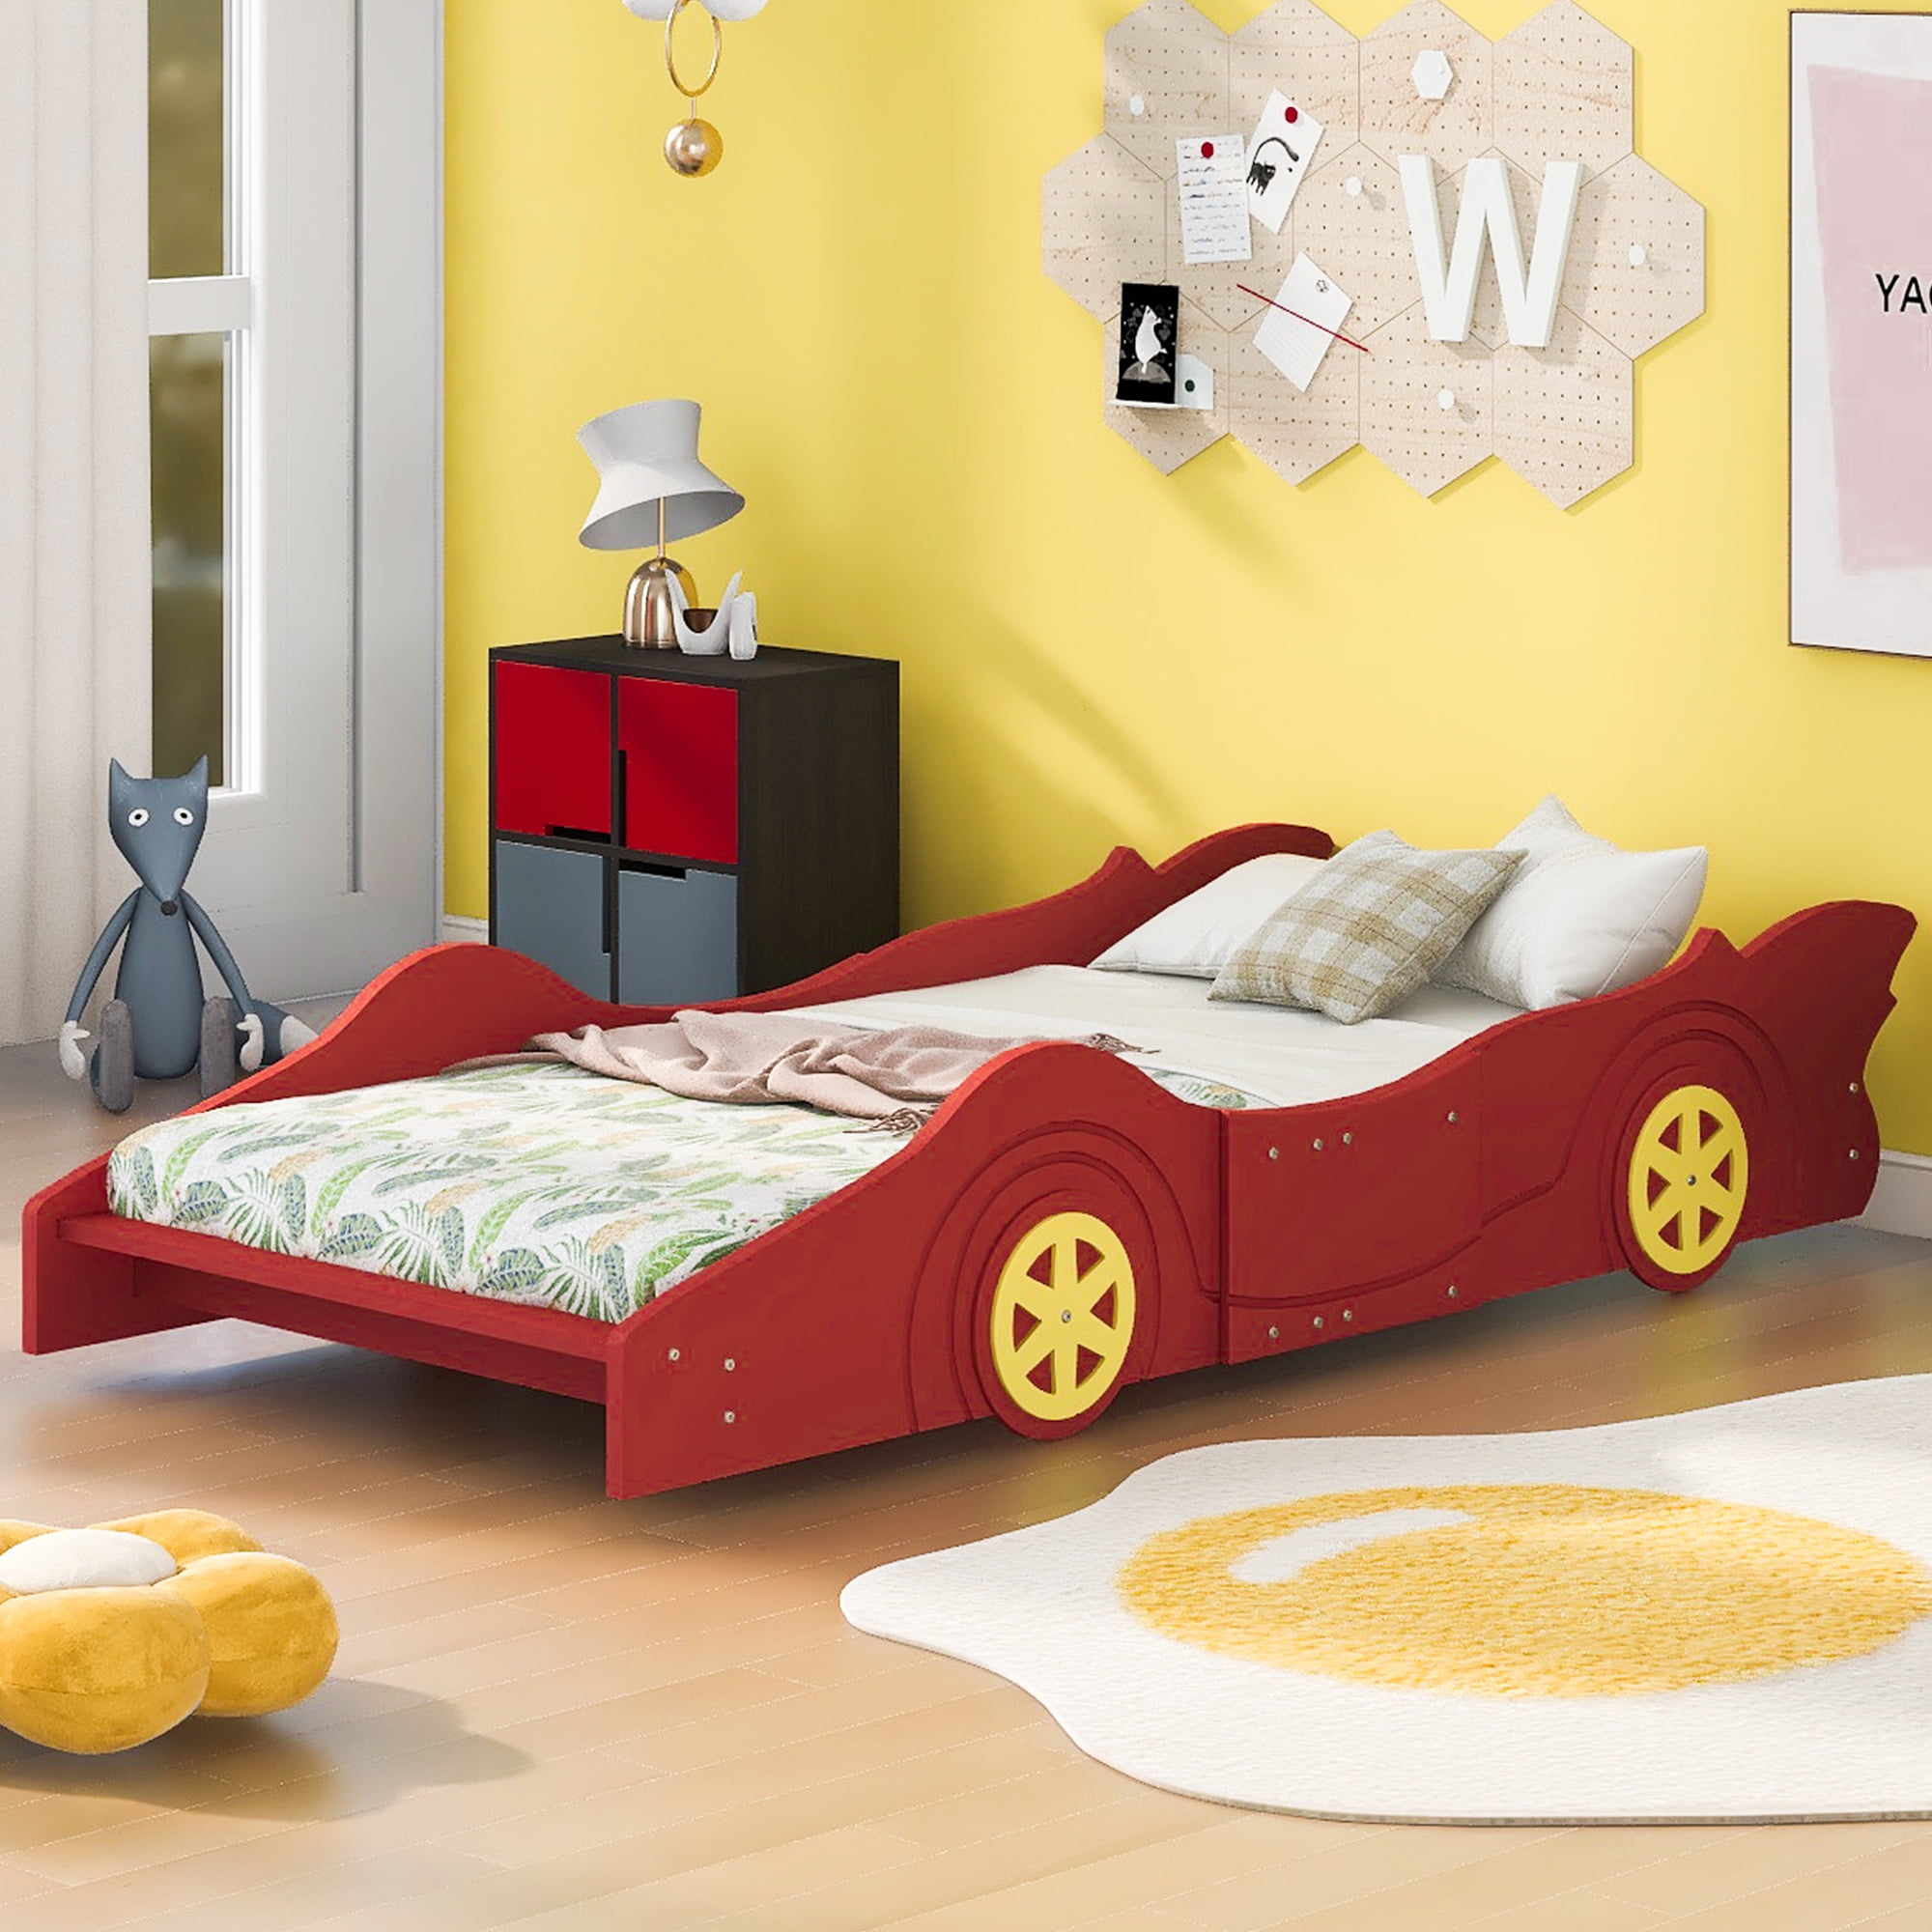 HSUNNS Twin Size Kids Bed for Boys Girls Toddlers, Wood Race Car-Shaped  Platform Bed with 2 Sides Safety Rails and Wheels for Kids' Room Bedroom